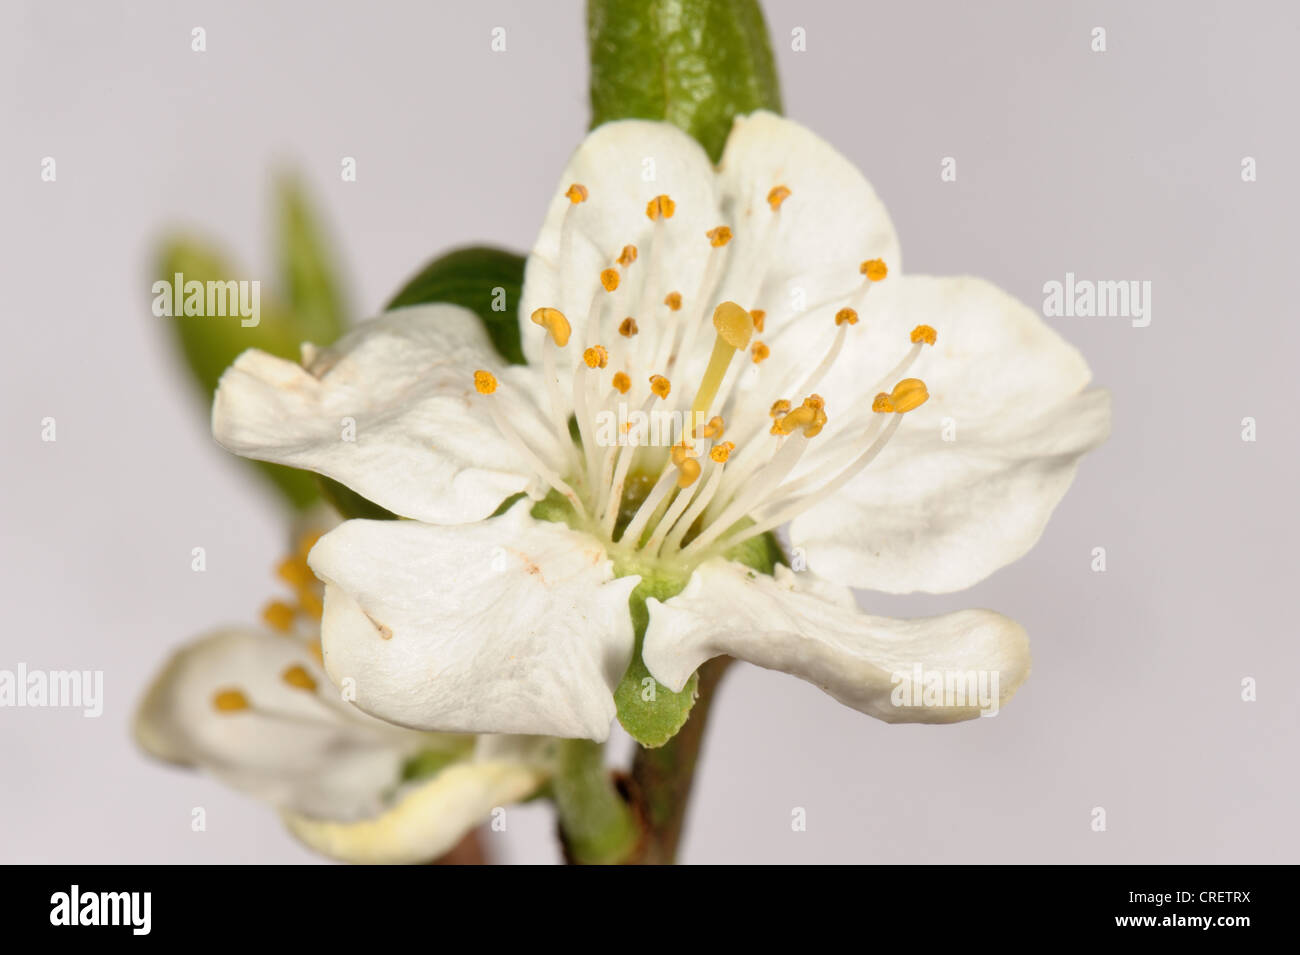 Plum flower showing anthers, filaments, style & stigma on a white background Stock Photo